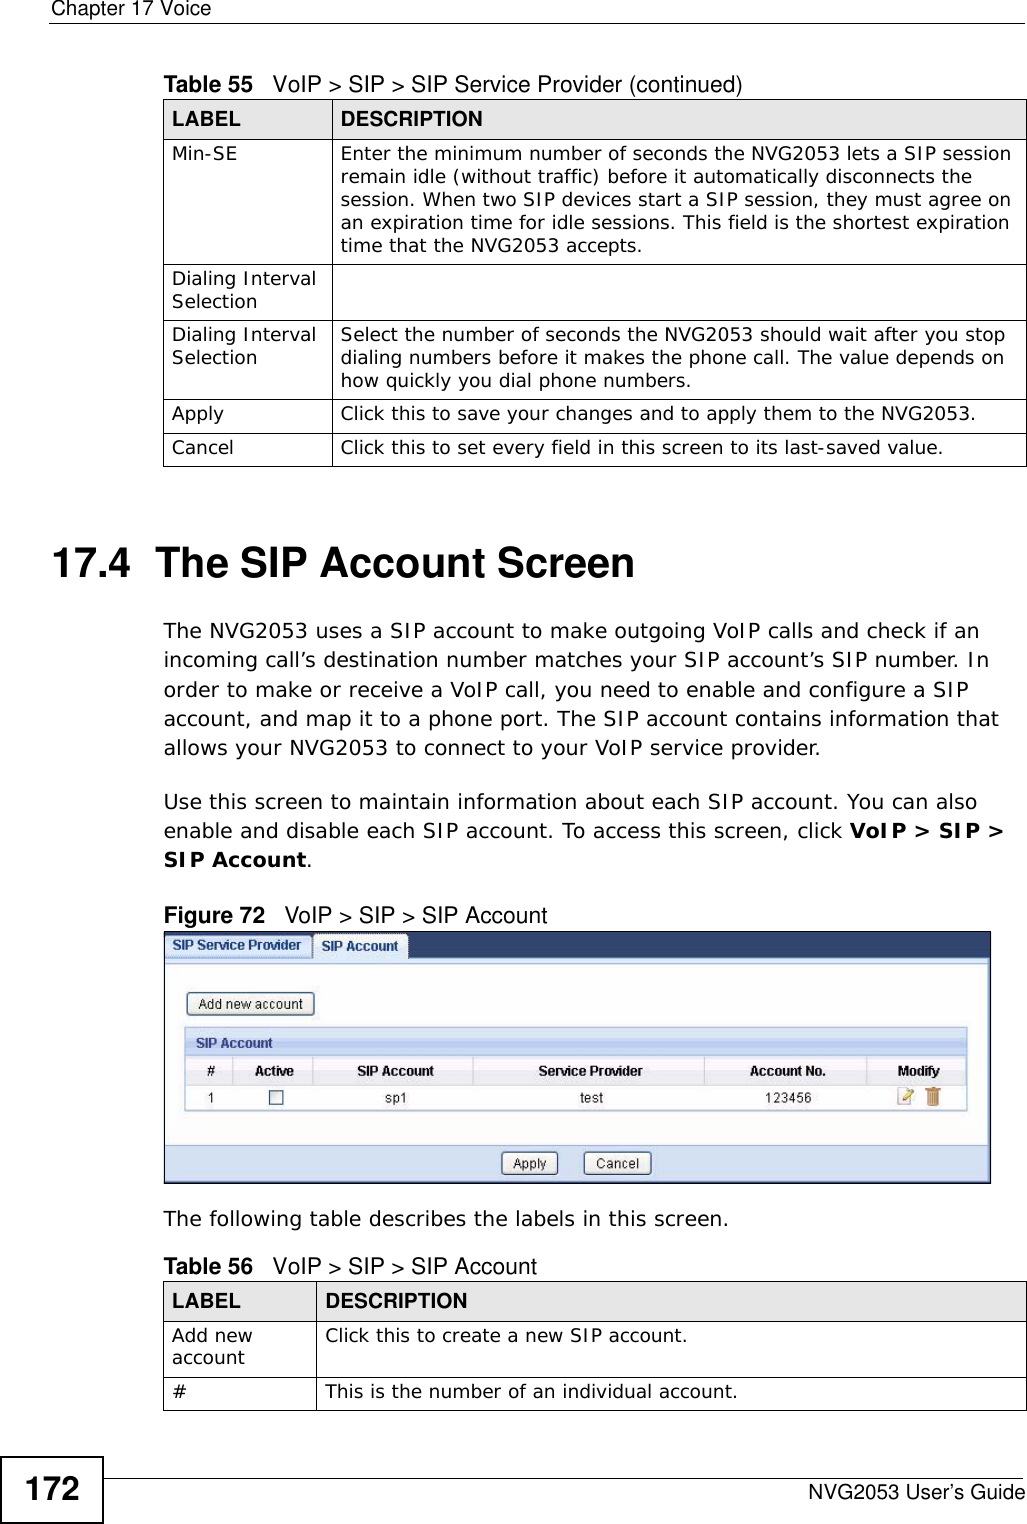 Chapter 17 VoiceNVG2053 User’s Guide17217.4  The SIP Account Screen The NVG2053 uses a SIP account to make outgoing VoIP calls and check if an incoming call’s destination number matches your SIP account’s SIP number. In order to make or receive a VoIP call, you need to enable and configure a SIP account, and map it to a phone port. The SIP account contains information that allows your NVG2053 to connect to your VoIP service provider. Use this screen to maintain information about each SIP account. You can also enable and disable each SIP account. To access this screen, click VoIP &gt; SIP &gt; SIP Account.Figure 72   VoIP &gt; SIP &gt; SIP AccountThe following table describes the labels in this screen. Min-SE Enter the minimum number of seconds the NVG2053 lets a SIP session remain idle (without traffic) before it automatically disconnects the session. When two SIP devices start a SIP session, they must agree on an expiration time for idle sessions. This field is the shortest expiration time that the NVG2053 accepts.Dialing Interval SelectionDialing Interval Selection Select the number of seconds the NVG2053 should wait after you stop dialing numbers before it makes the phone call. The value depends on how quickly you dial phone numbers.Apply Click this to save your changes and to apply them to the NVG2053.Cancel Click this to set every field in this screen to its last-saved value.Table 55   VoIP &gt; SIP &gt; SIP Service Provider (continued)LABEL DESCRIPTIONTable 56   VoIP &gt; SIP &gt; SIP AccountLABEL DESCRIPTIONAdd new account Click this to create a new SIP account.#This is the number of an individual account.